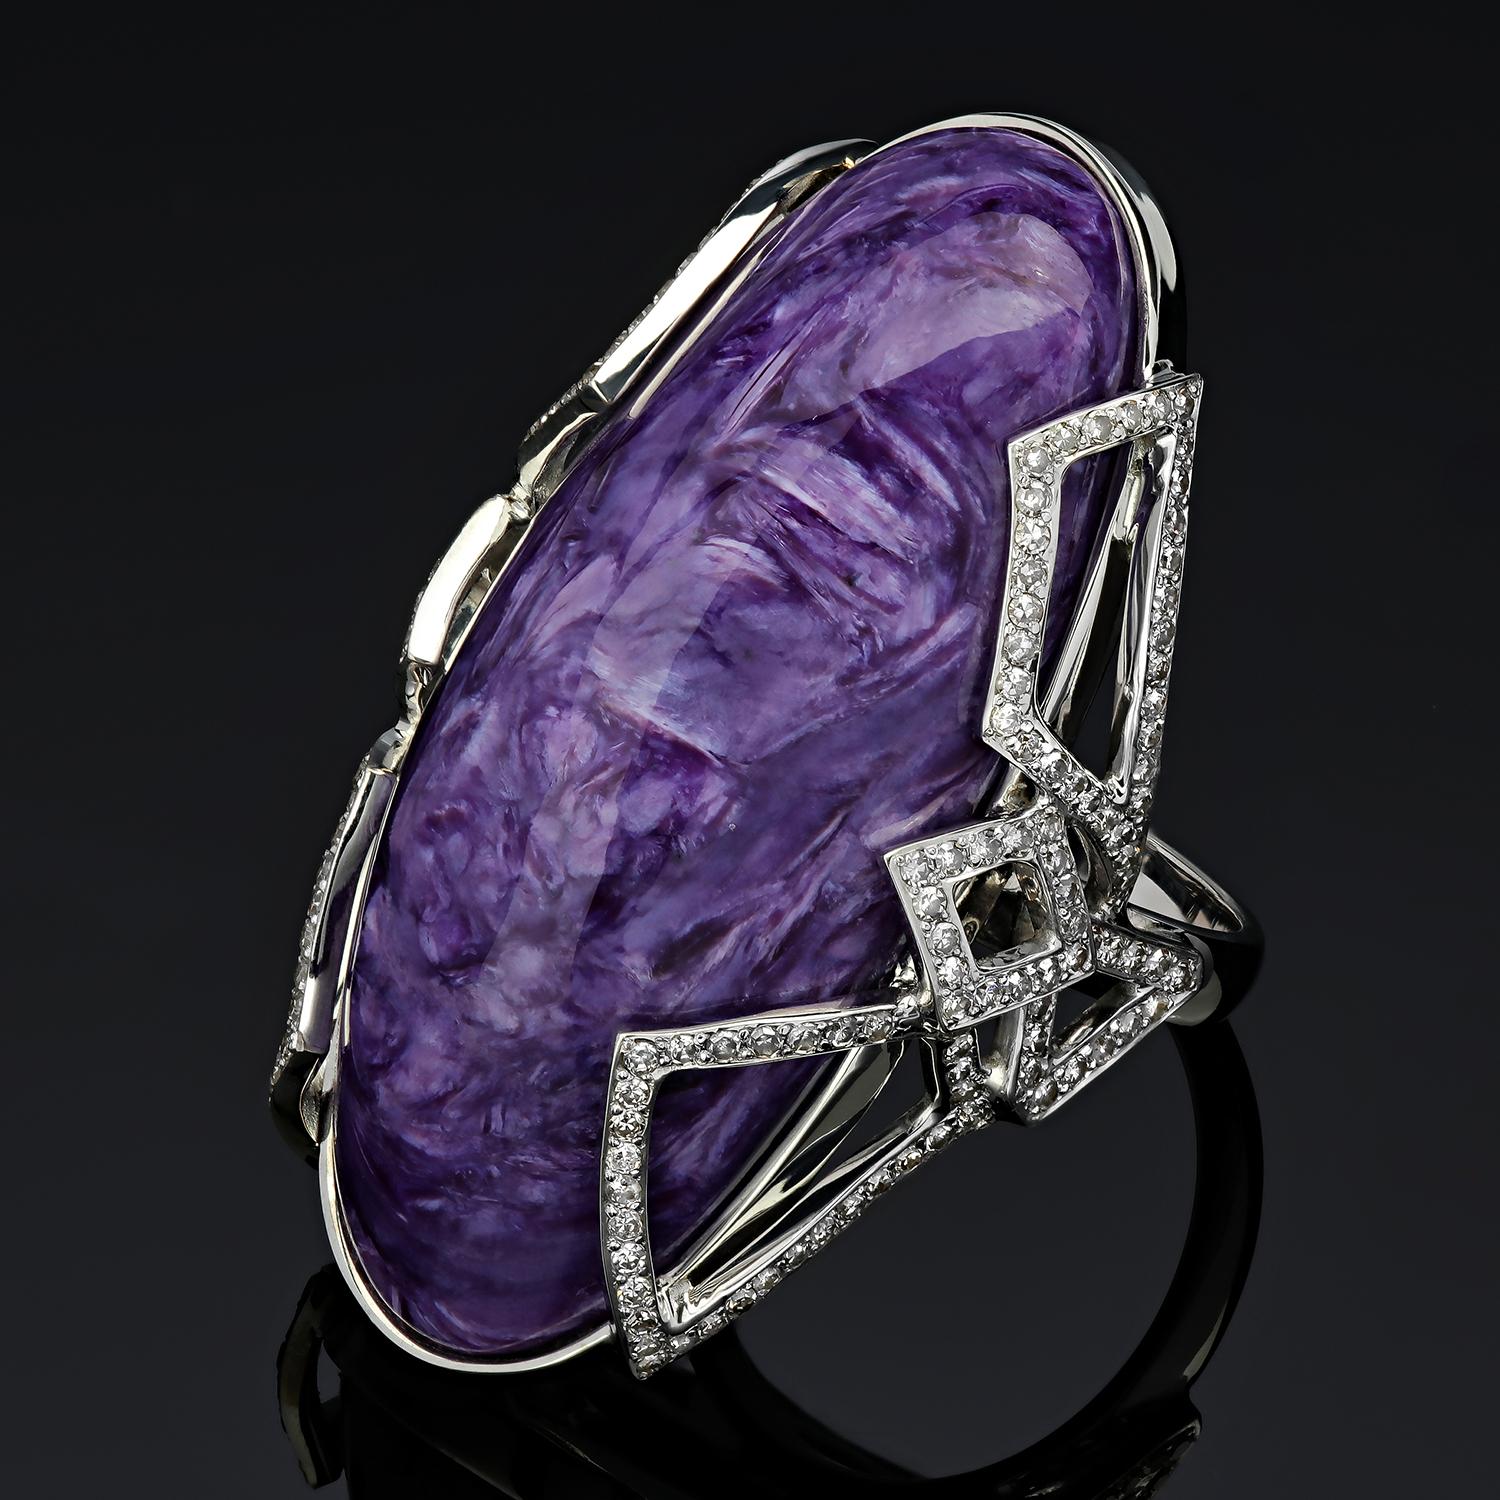 Natural fine quality Charoite ring mounted in 14K white gold and 190 Diamonds
Charoite measurements - 0.63 х 1.85 in / 16 х 47 mm
charoite weight - 46.43 carats
charoite lenght - 10 mm
weight of the ring - 19.25 grams
ring size - 7 US


We ship our